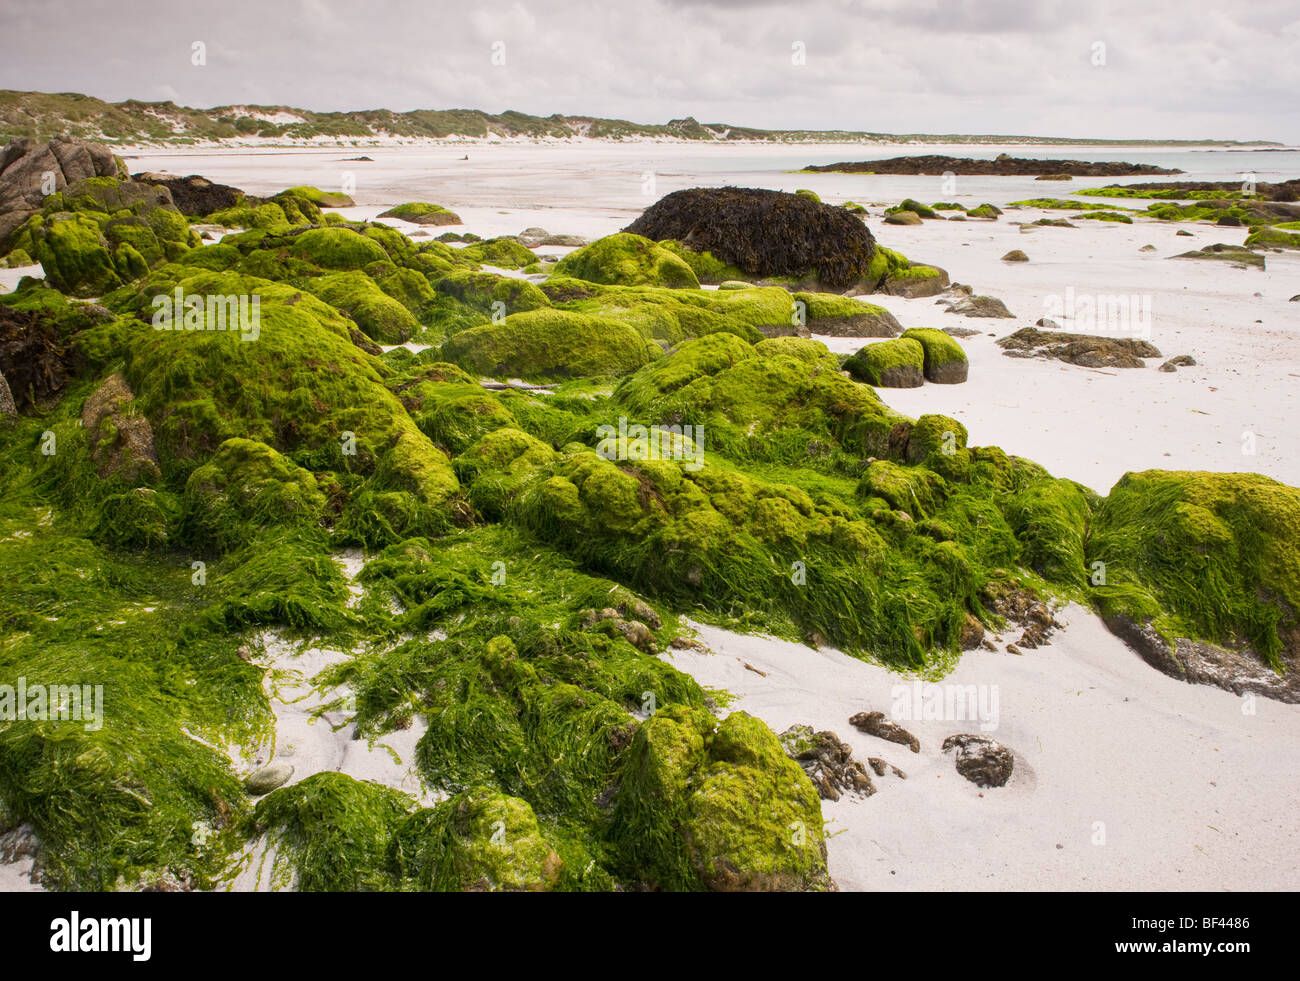 Sandy beach with algae-covered rocks at Balranald, on the west coast of North Uist, Outer Hebrides, Scotland Stock Photo